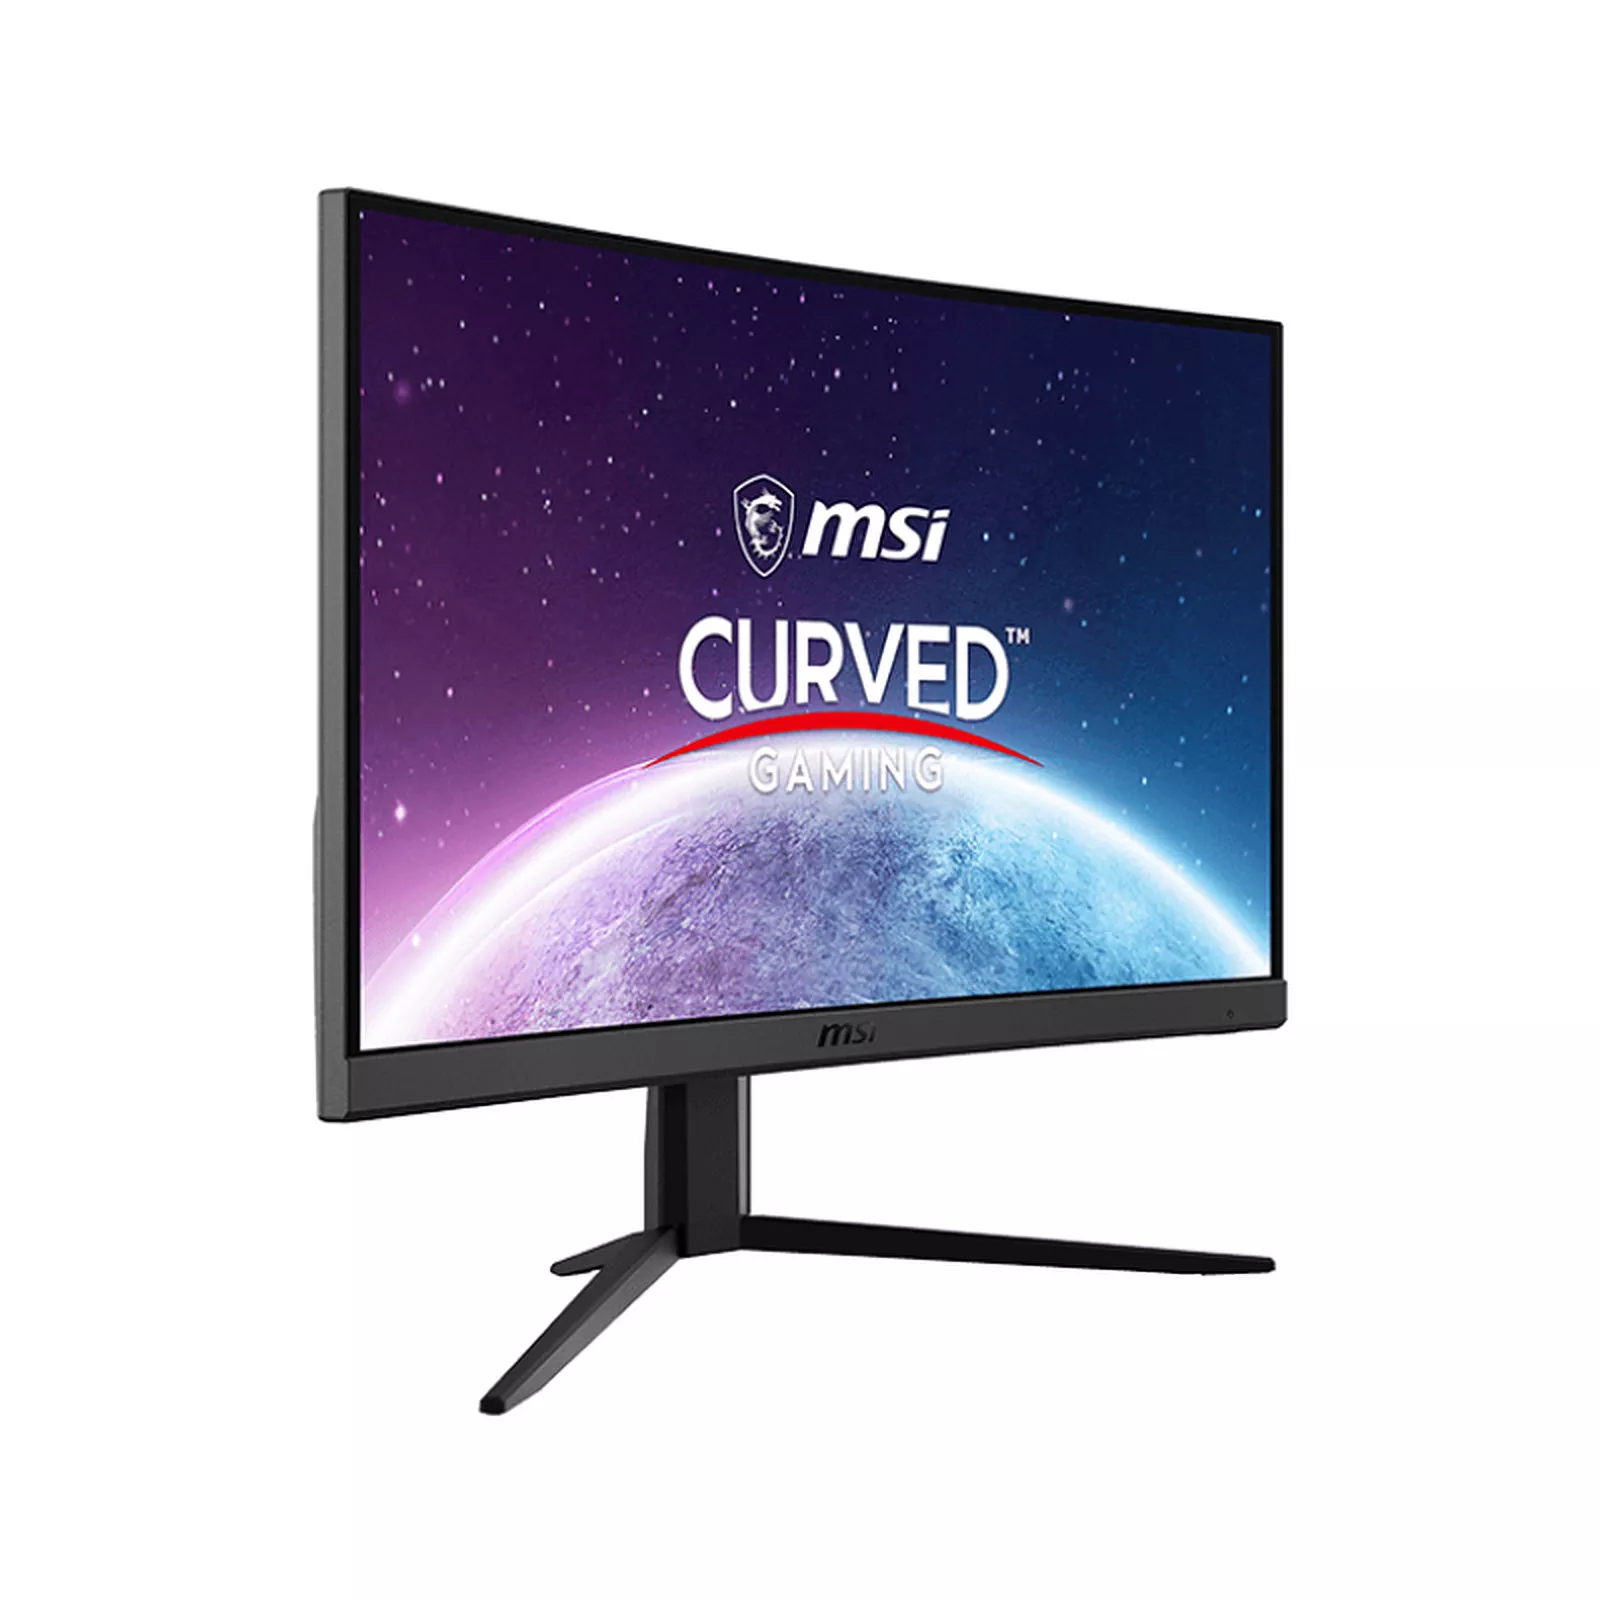 MSI 24" LED - G24C4 E2 FHD | 180Hz | 1ms CURVED